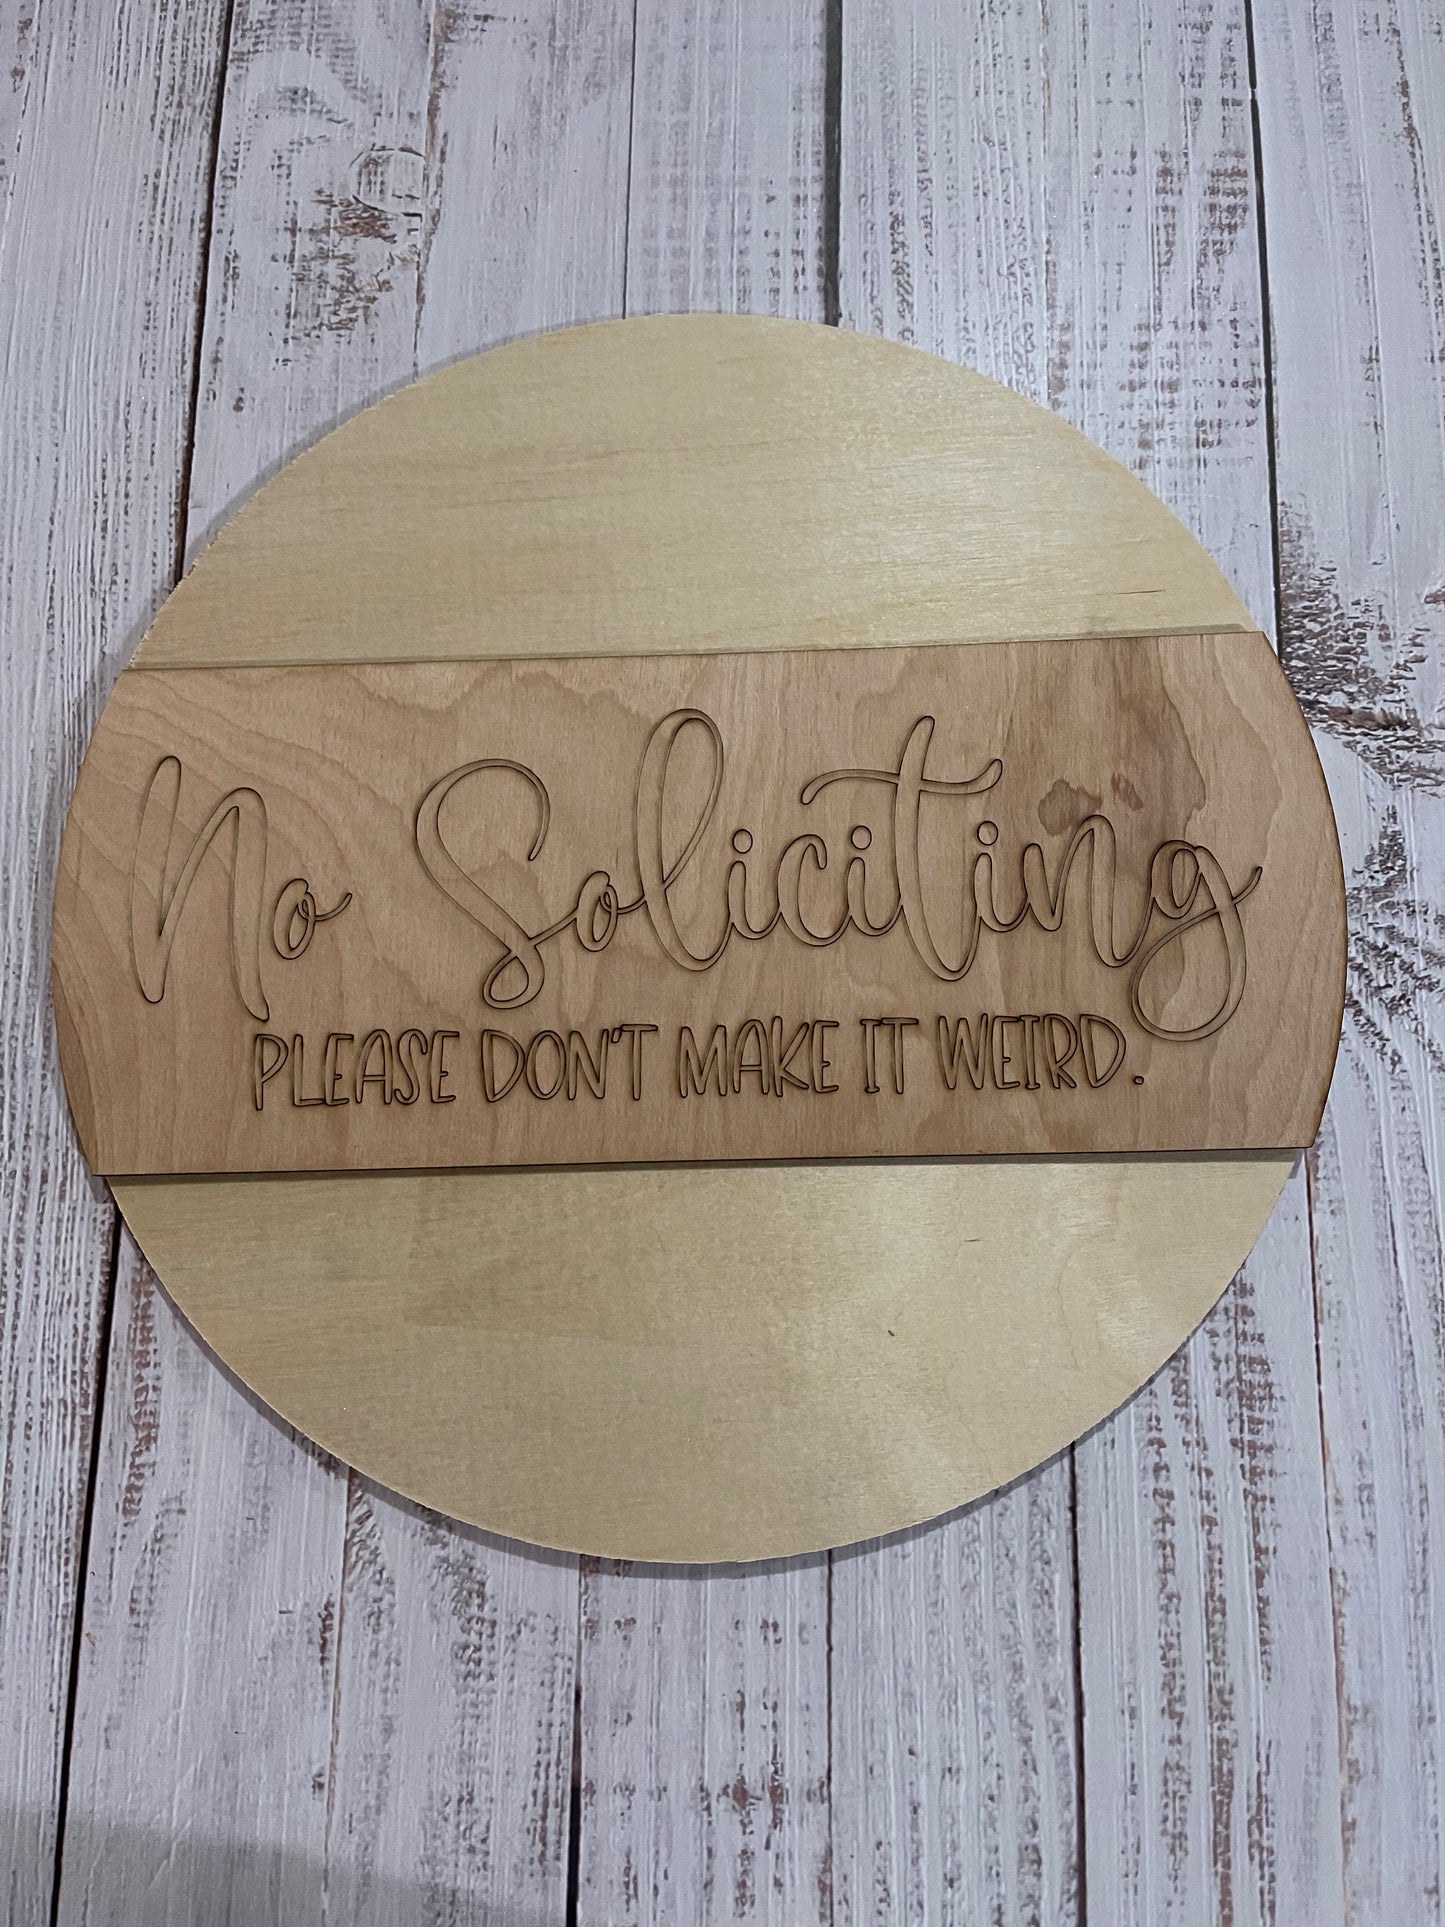 No Soliciting Please Don’t Make It Weird. Round Unfinished Scored Wood Blank. DIY wood cutout. Diy painting blank.